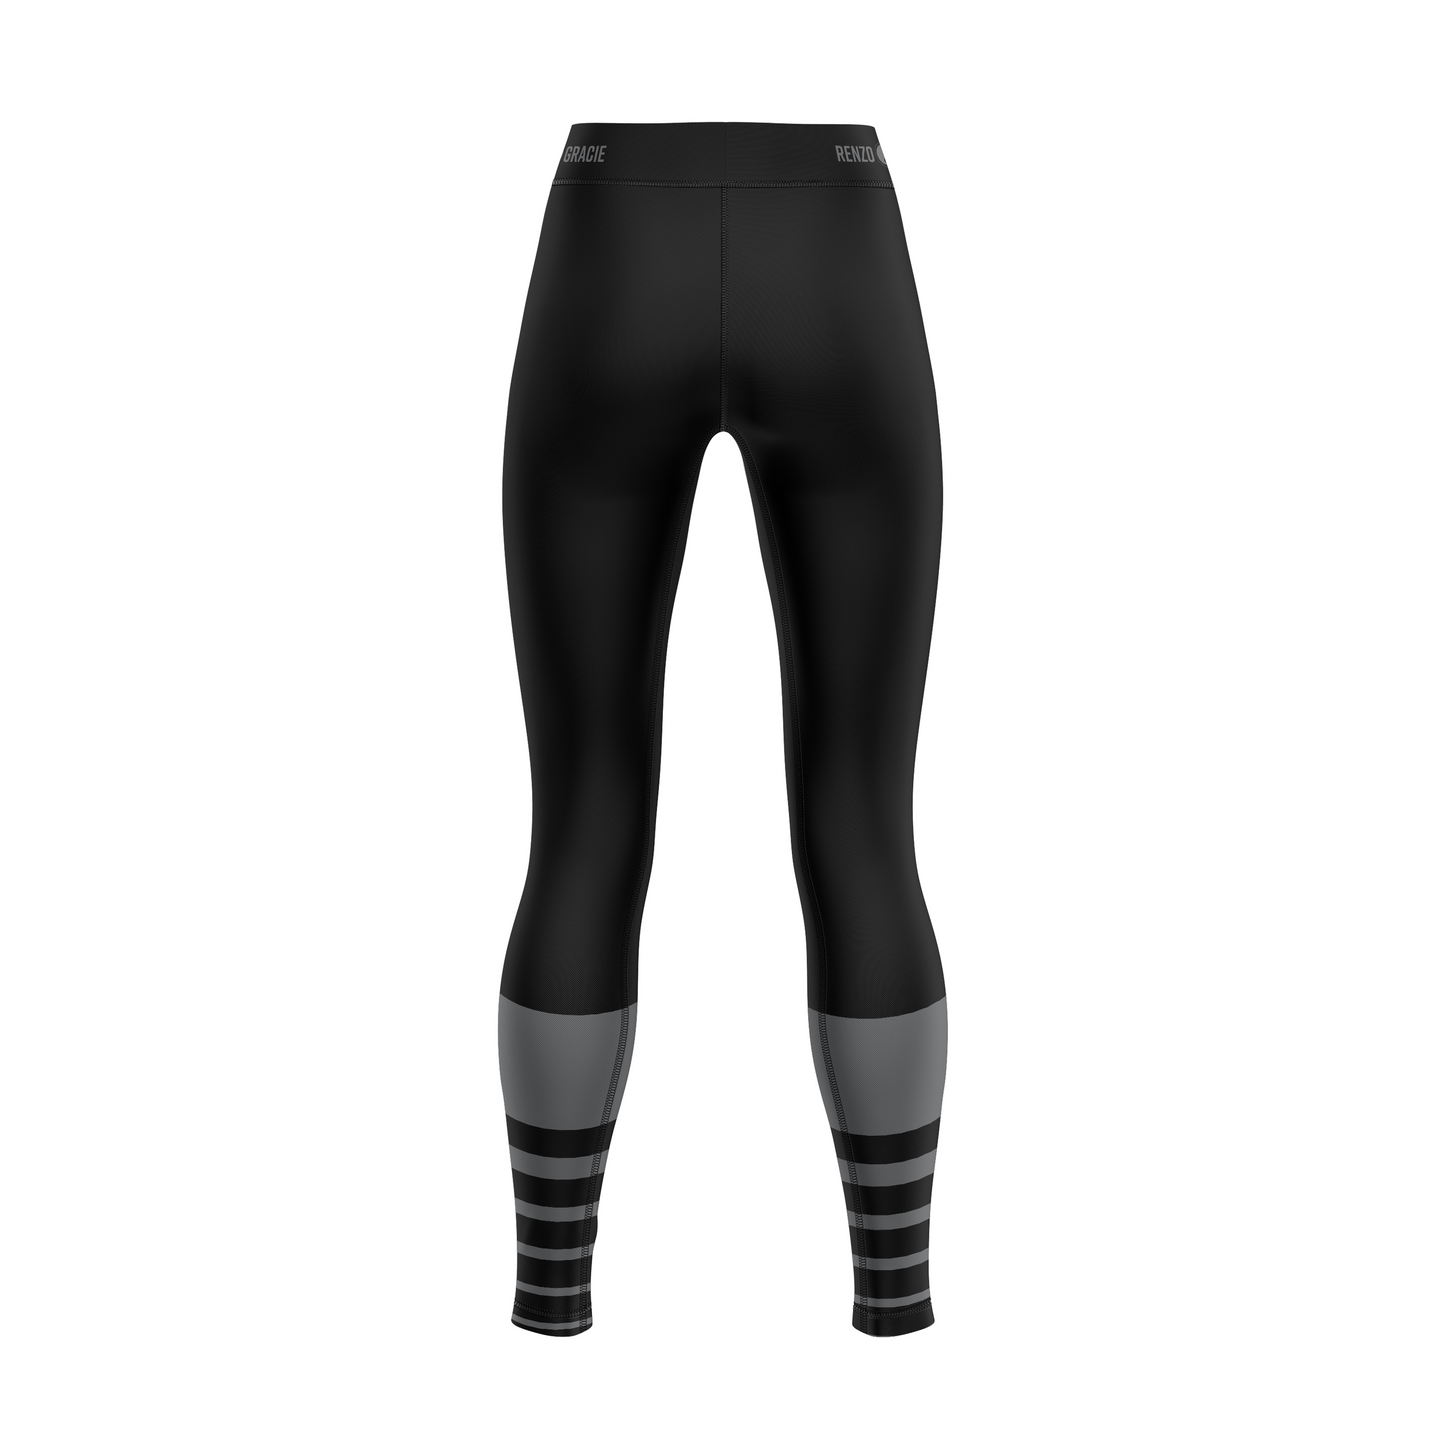 wholesale Renzo Gracie Katy women's grappling tights Standard Issue, black and grey